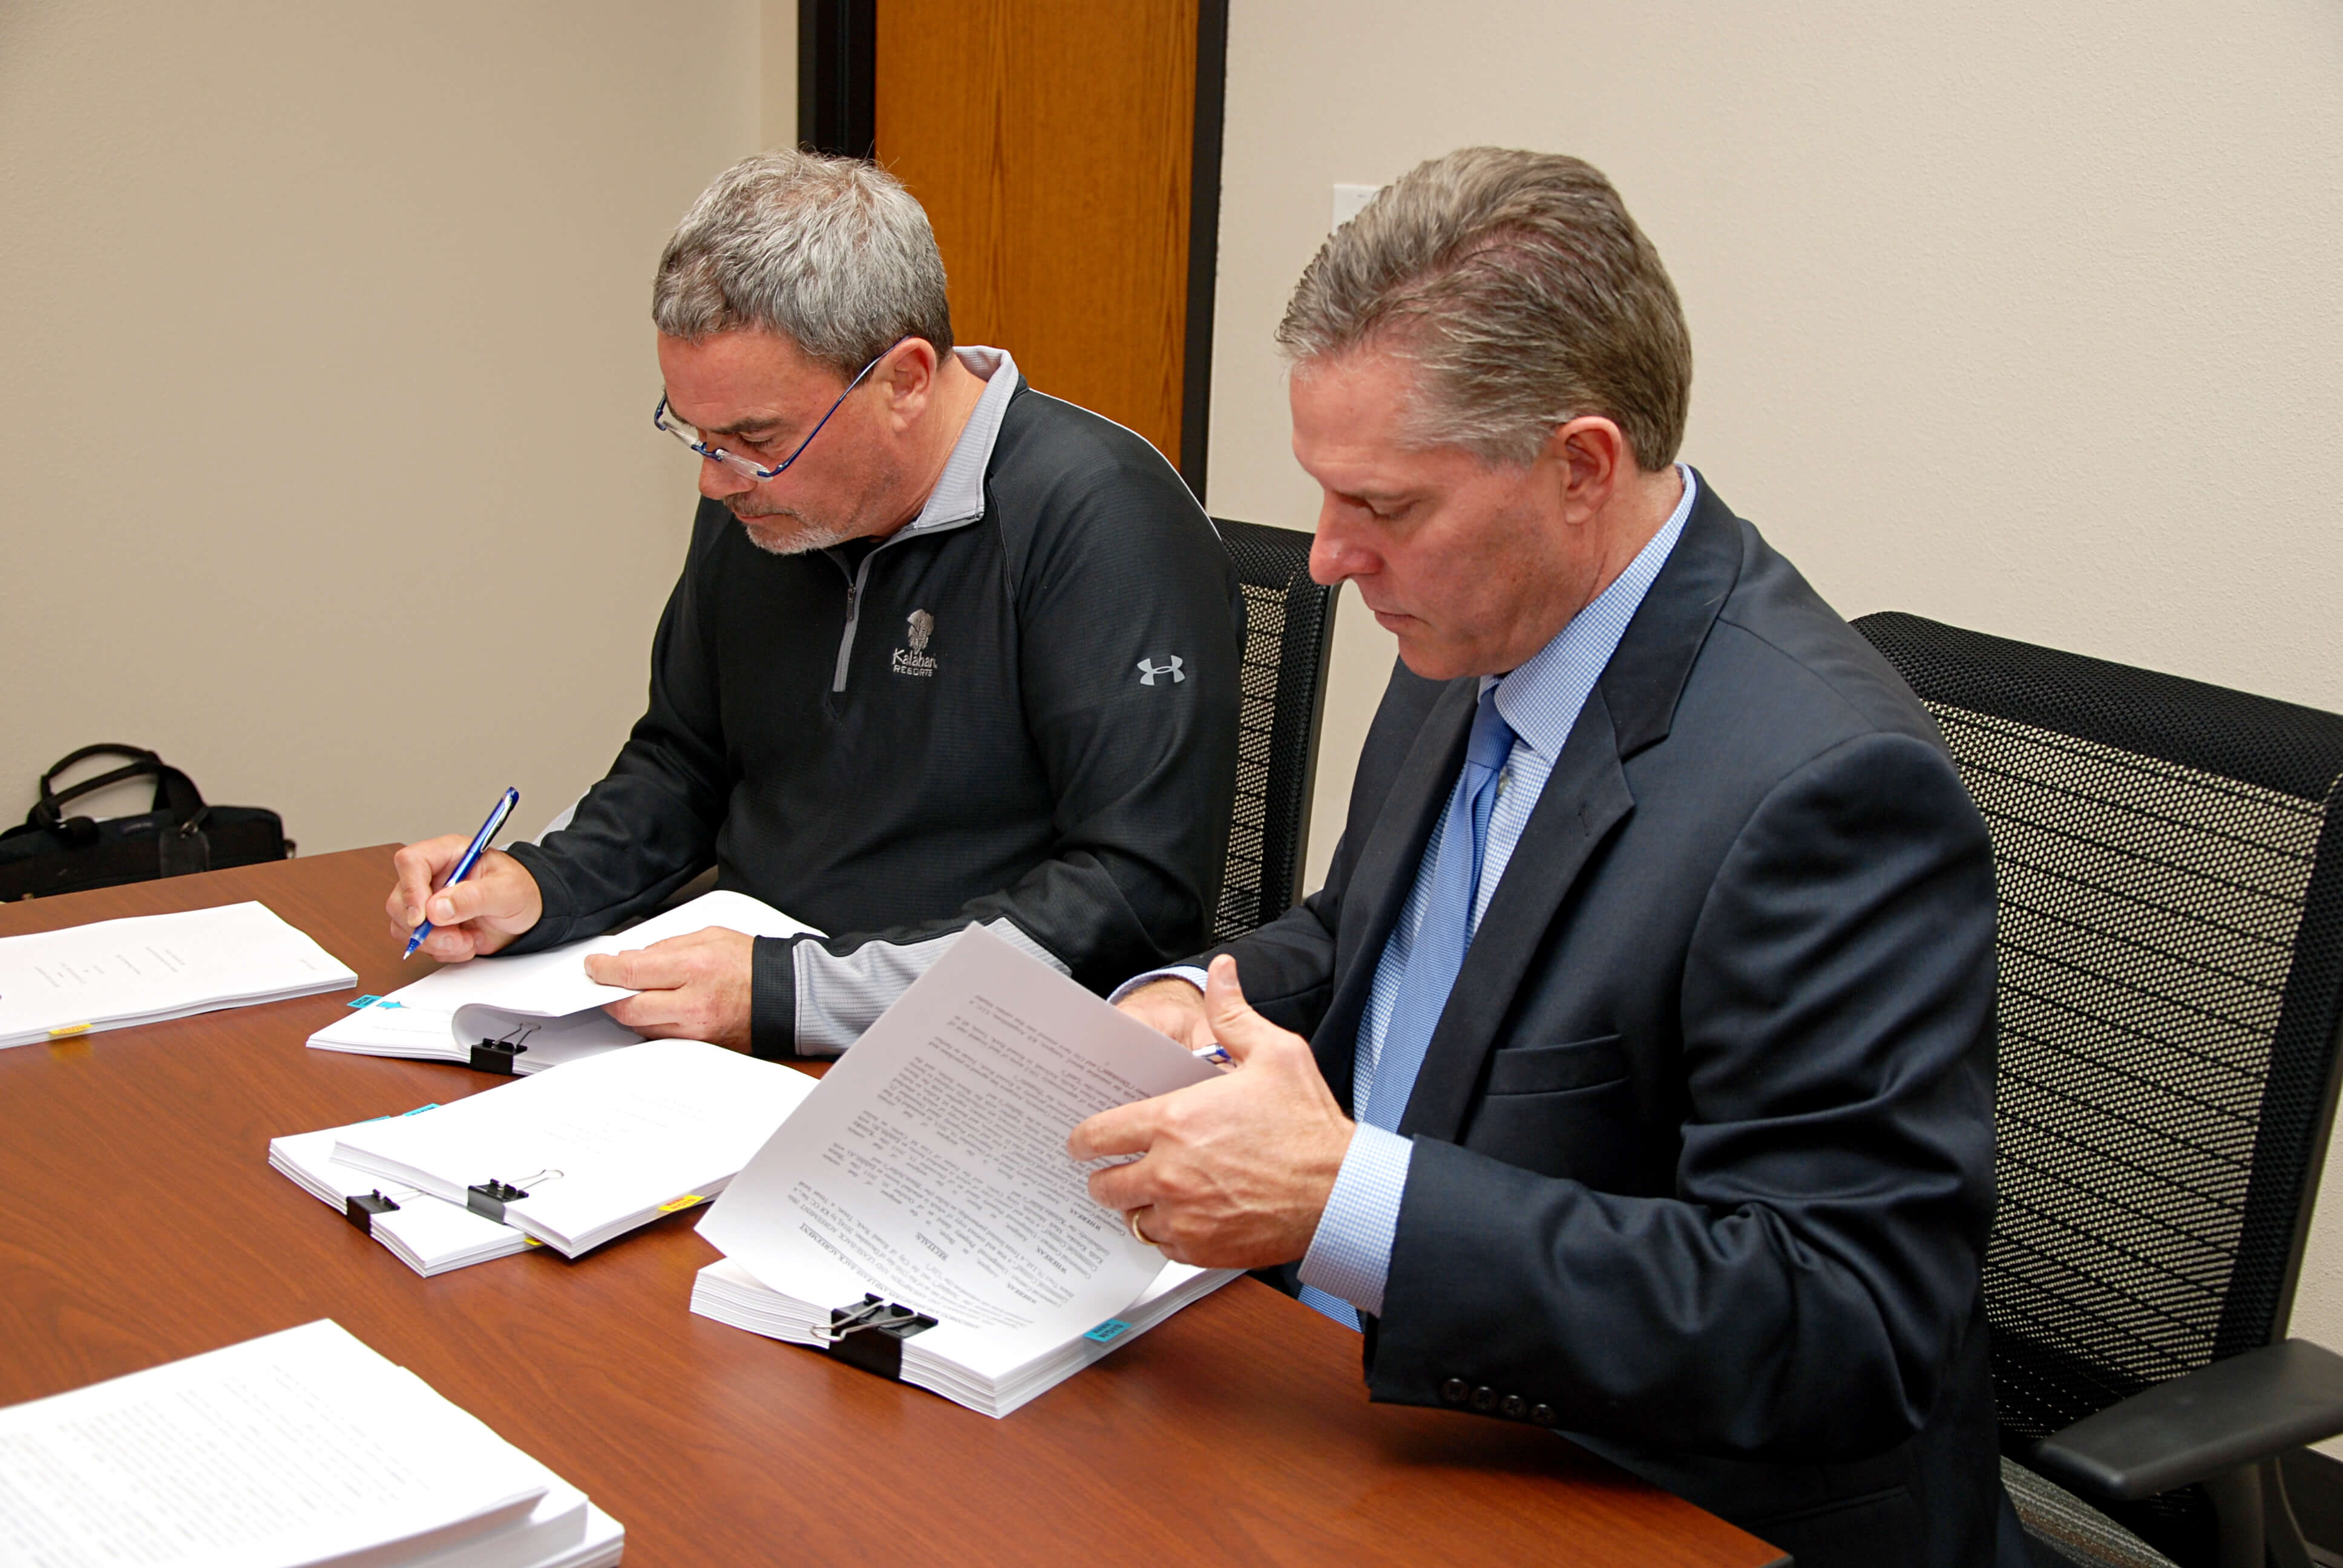 Mayor Alan McGraw, right, and Kalahari owner Todd Nelson sign agreements after the Dec. 15 City Council Meeting.